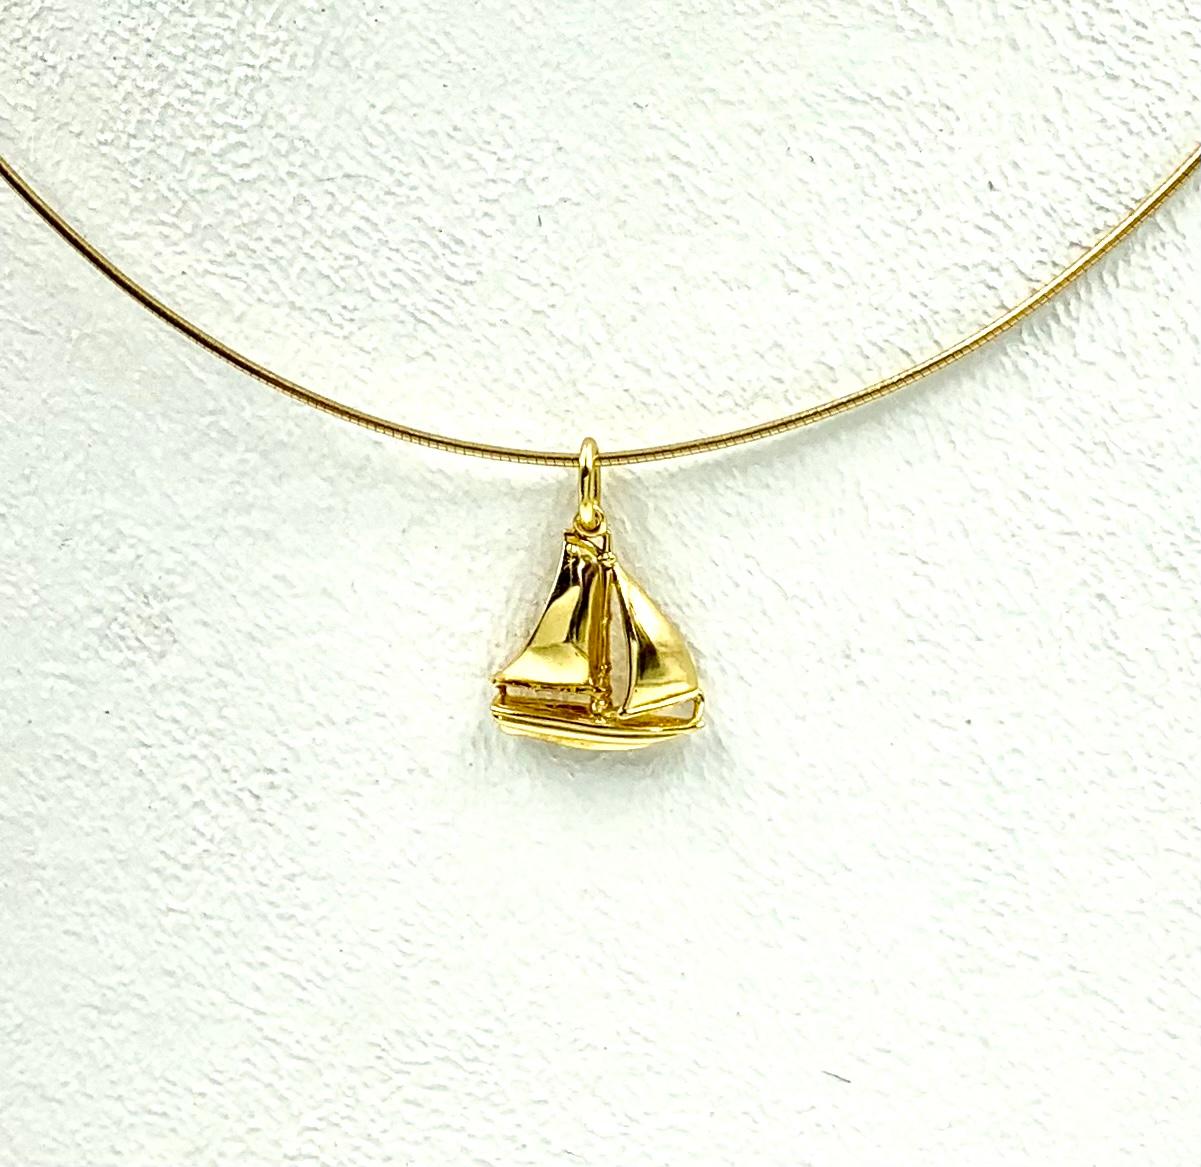 Twenty years from now, you will be more disappointed by the things you didn't do than those you did. So throw off the bow lines. Sail away from safe harbor. Catch the wind in your sails. Explore. Dream. Discover. 
- Mark Twain
Beautiful nautical 18K